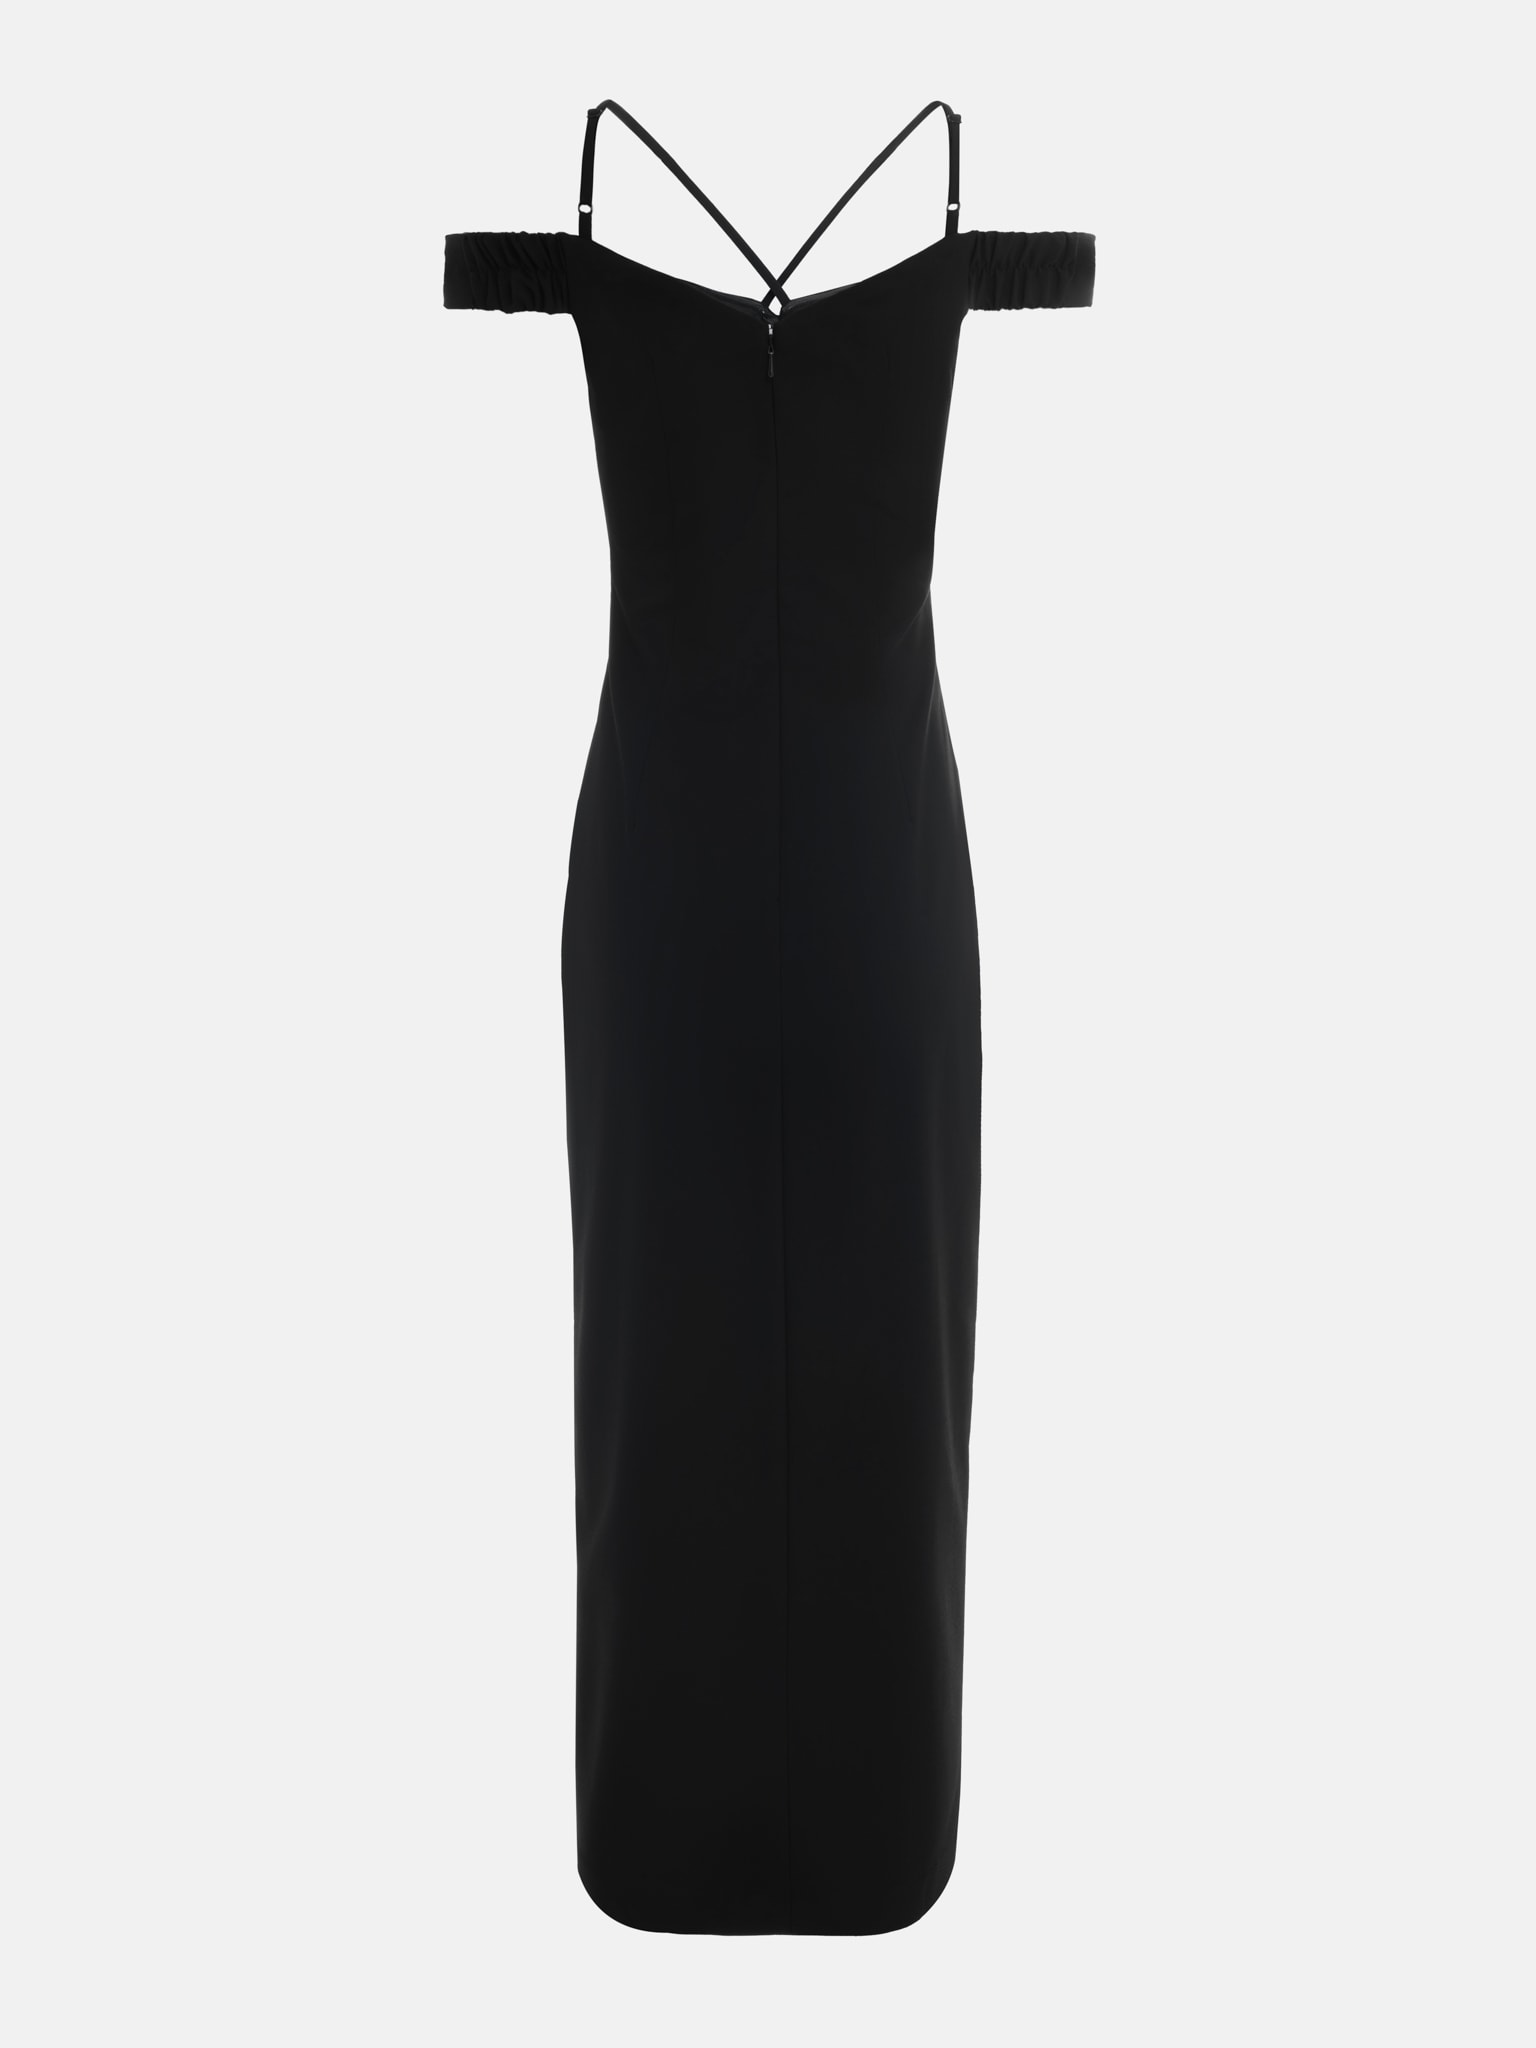 Fitted maxi dress with contrasting bow on bodice